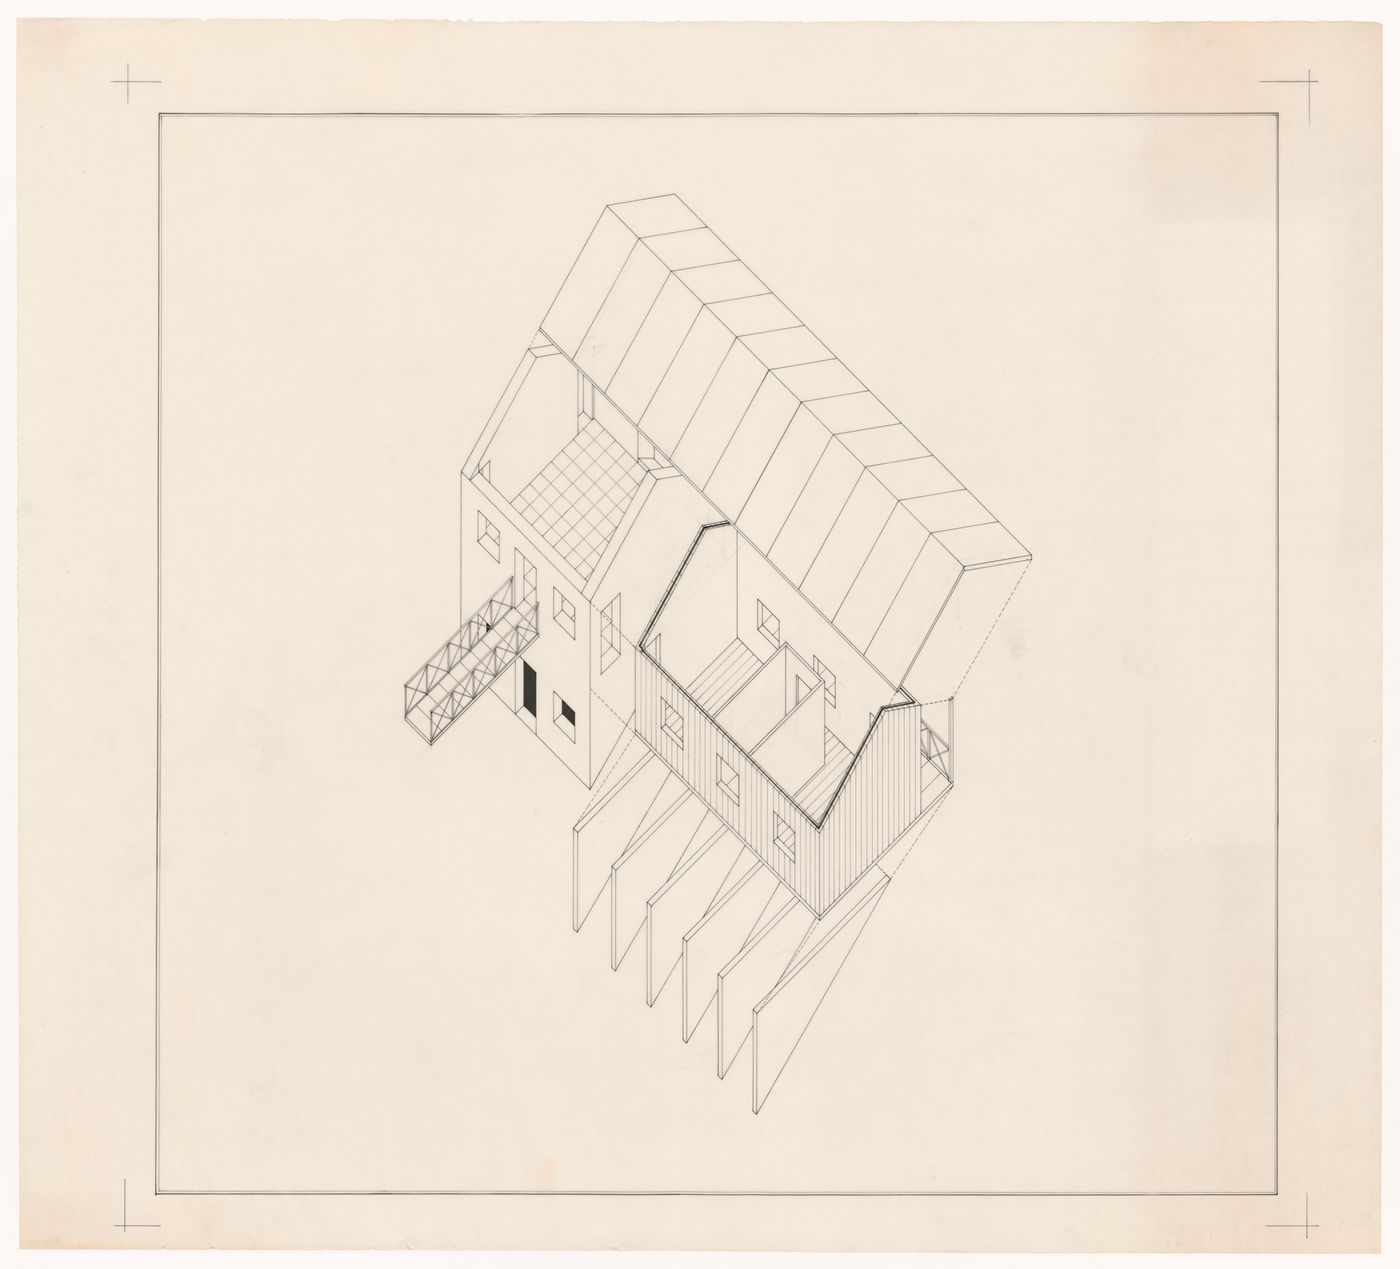 Sectional axonometric for Padiglione nel parco, Bracchio, Italy